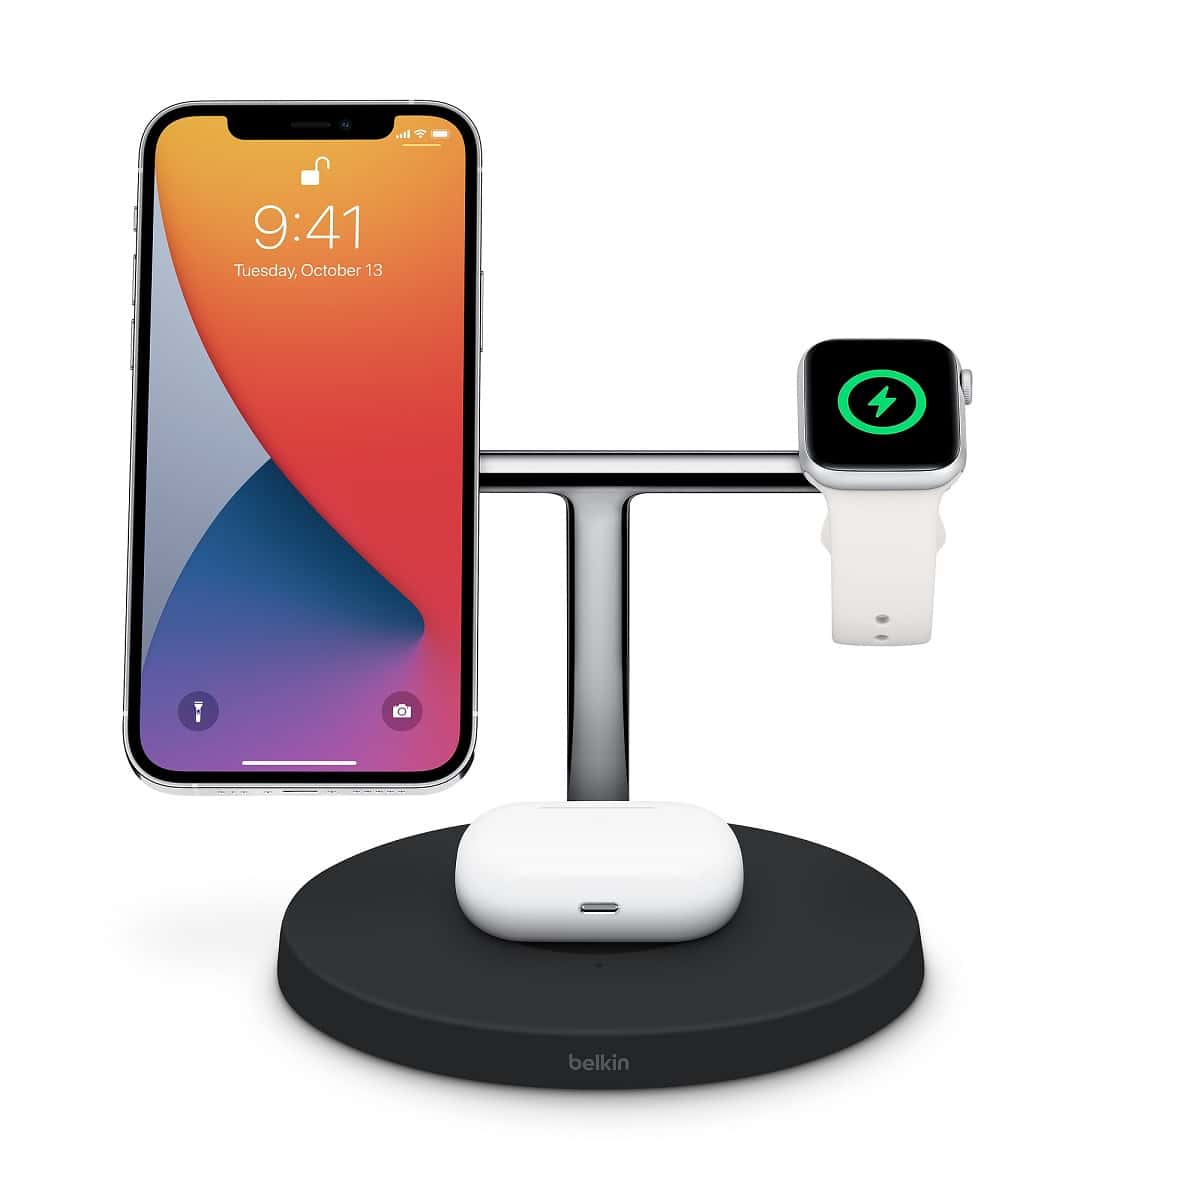 Belkin BOOSTCHARGE PRO 3-in-1 Wireless Charger with MagSafe now available